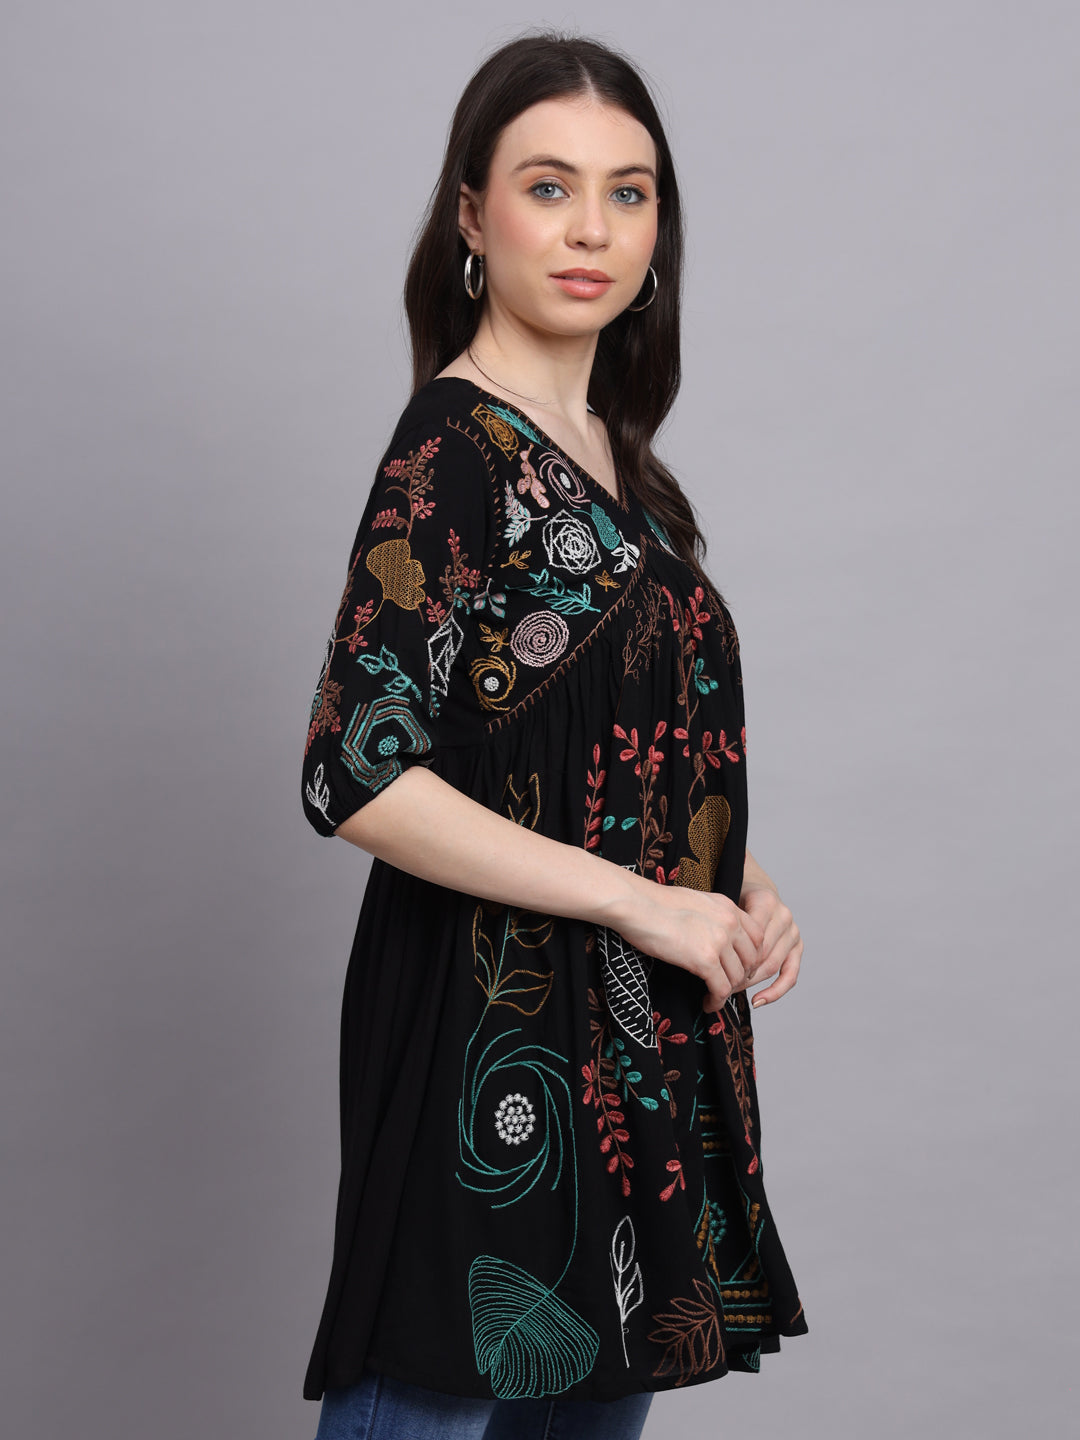 Black Rayon Fabric  Embrodery top